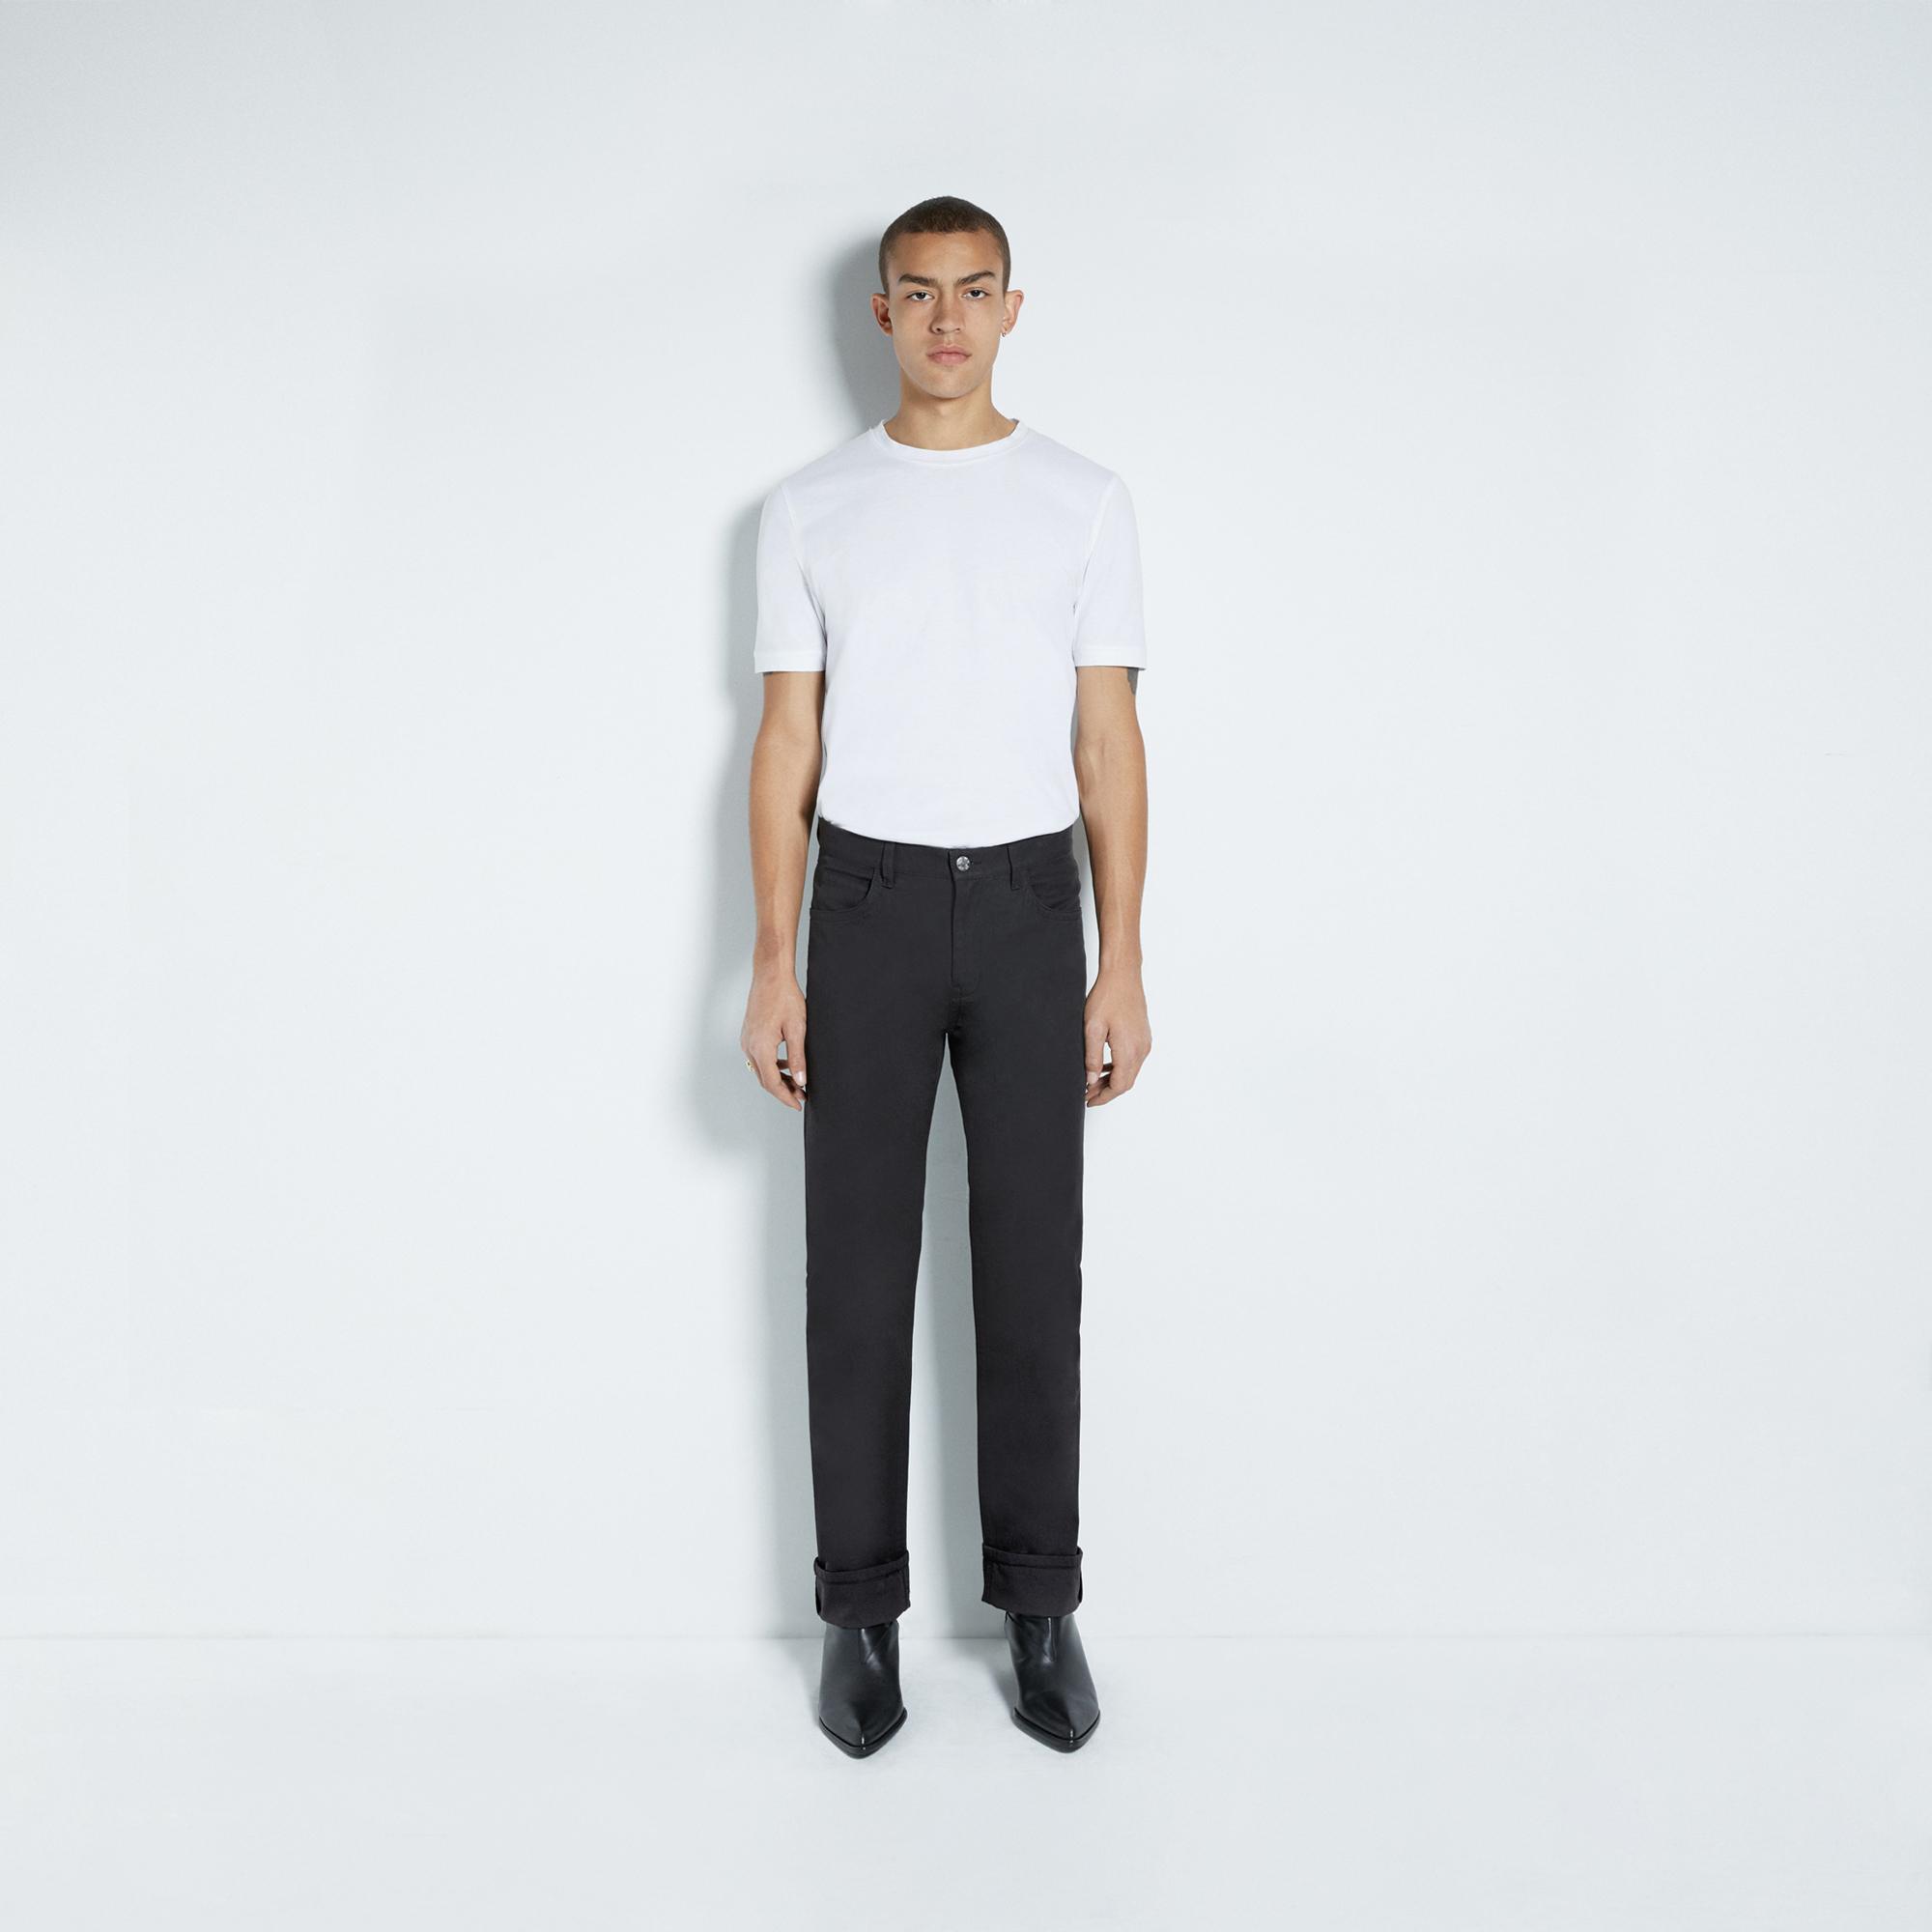 Mens Pants and Denim | Official site